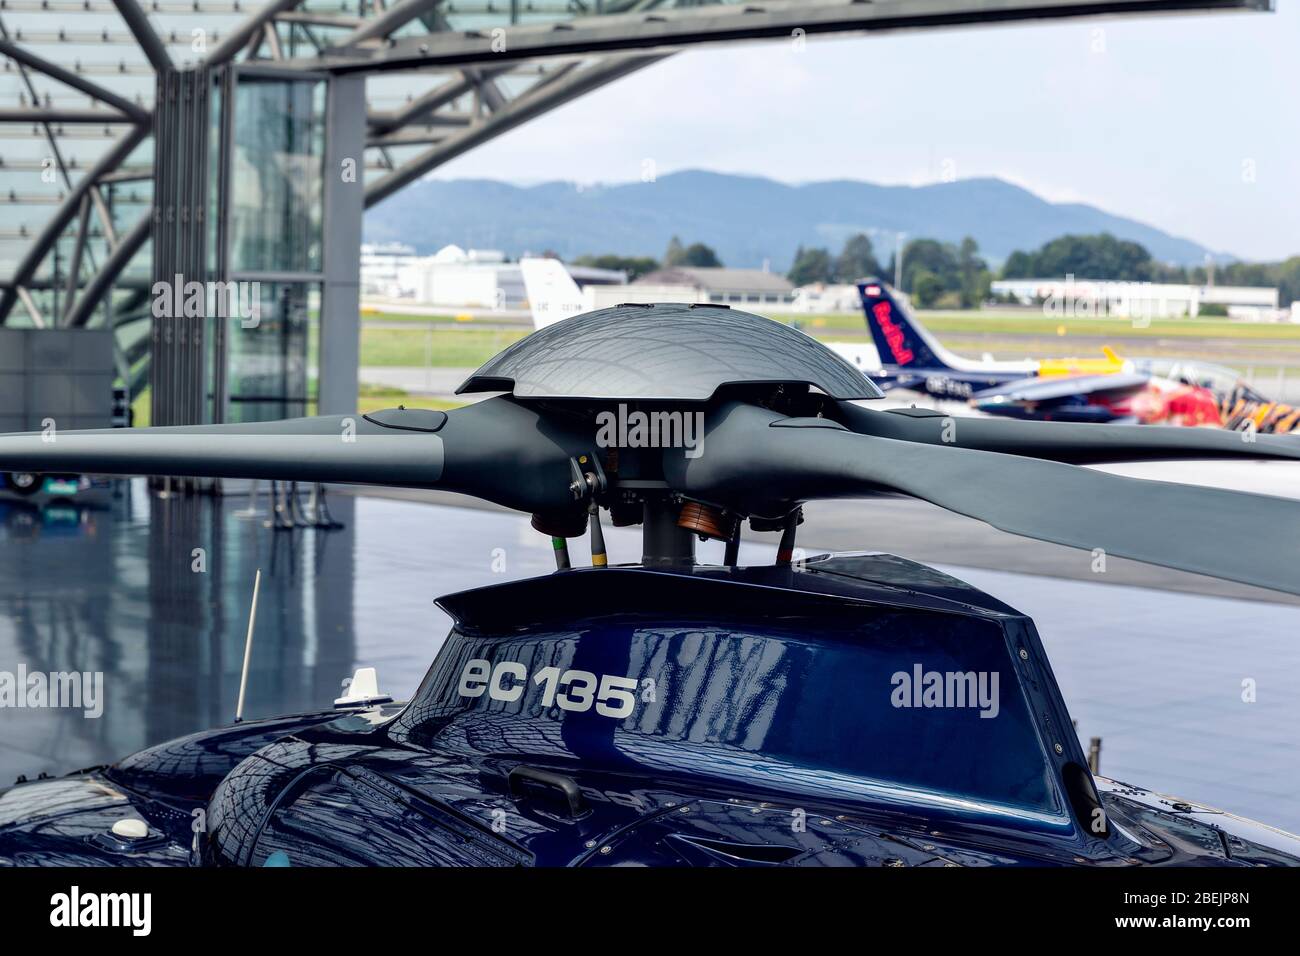 Salzburg / Austria - August 2019: Rotor blades of the helicopter in Red Bull Hangar-7, a modern glass and steel building hosting a collection of histo Stock Photo